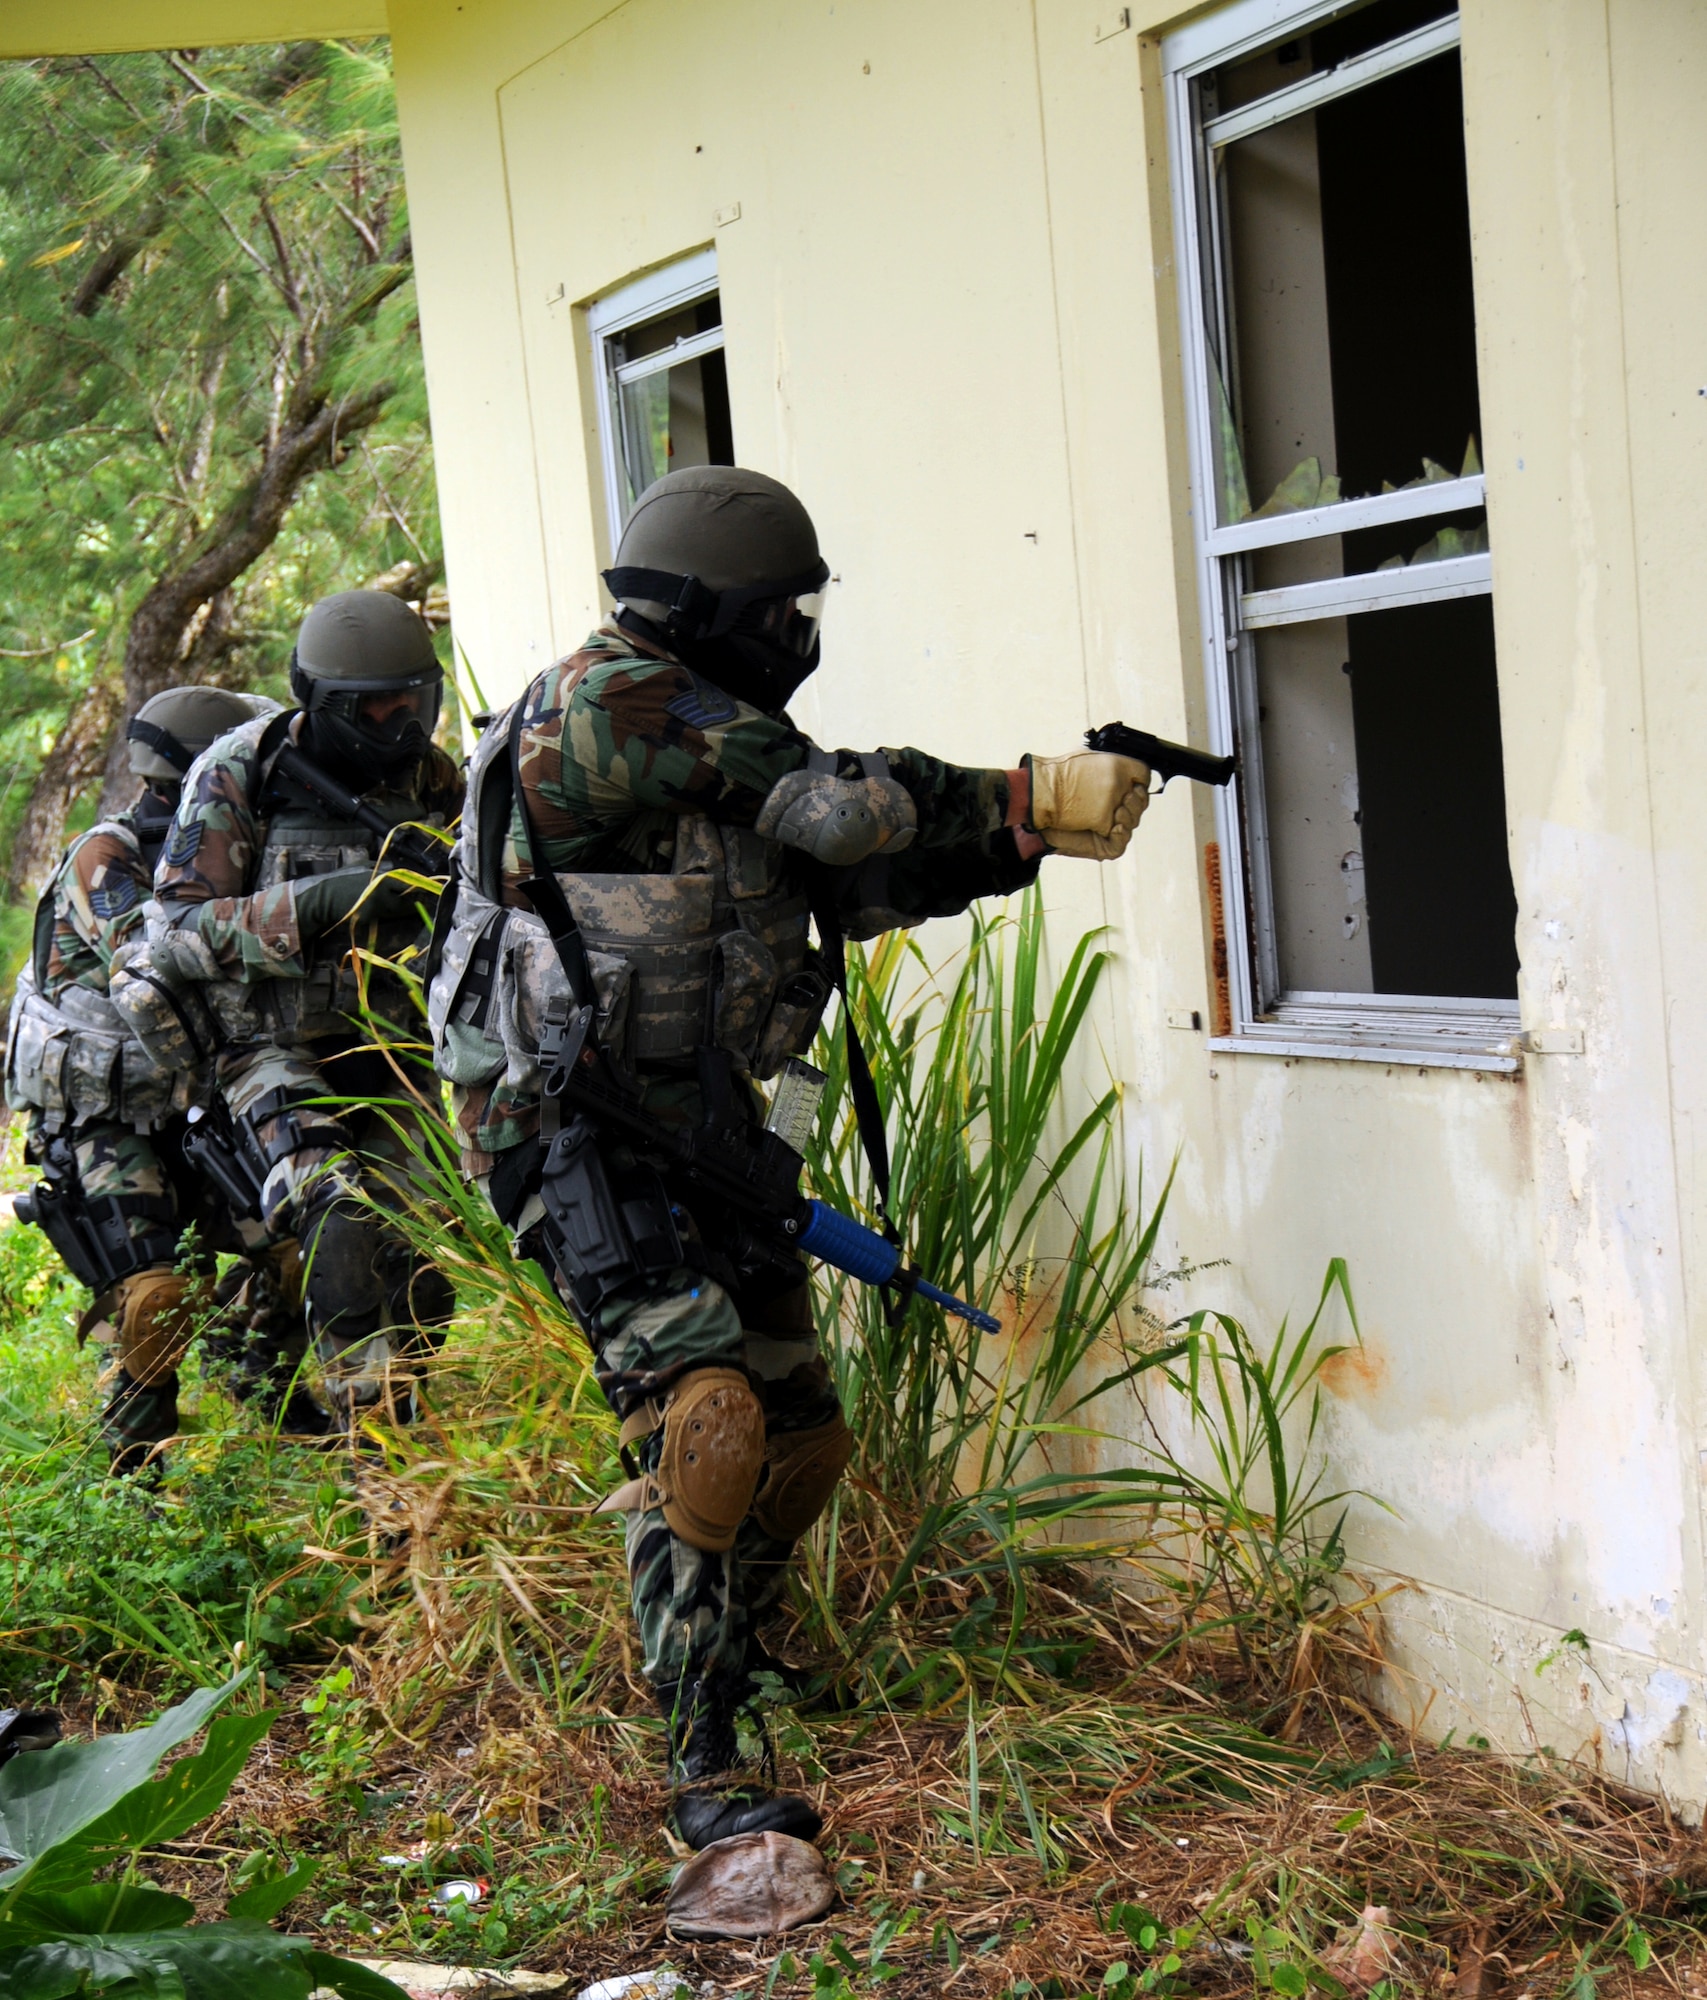 ANDERSEN AIR FORCE BASE, Guam - Security Forces members out of the 176th Wing, Kulis Air National Guard perform a quick check before entering a house here during the Commando Warrior Urban Operations exercise 09-1, Jan 31. The mission of the Regional Training Center of Commando Warrior is to enhance the combat readiness of PACAF forces through training and evaluation of force protection and ground combat skills. (U.S. Air Force photo by Airman 1st Class Courtney Witt)
